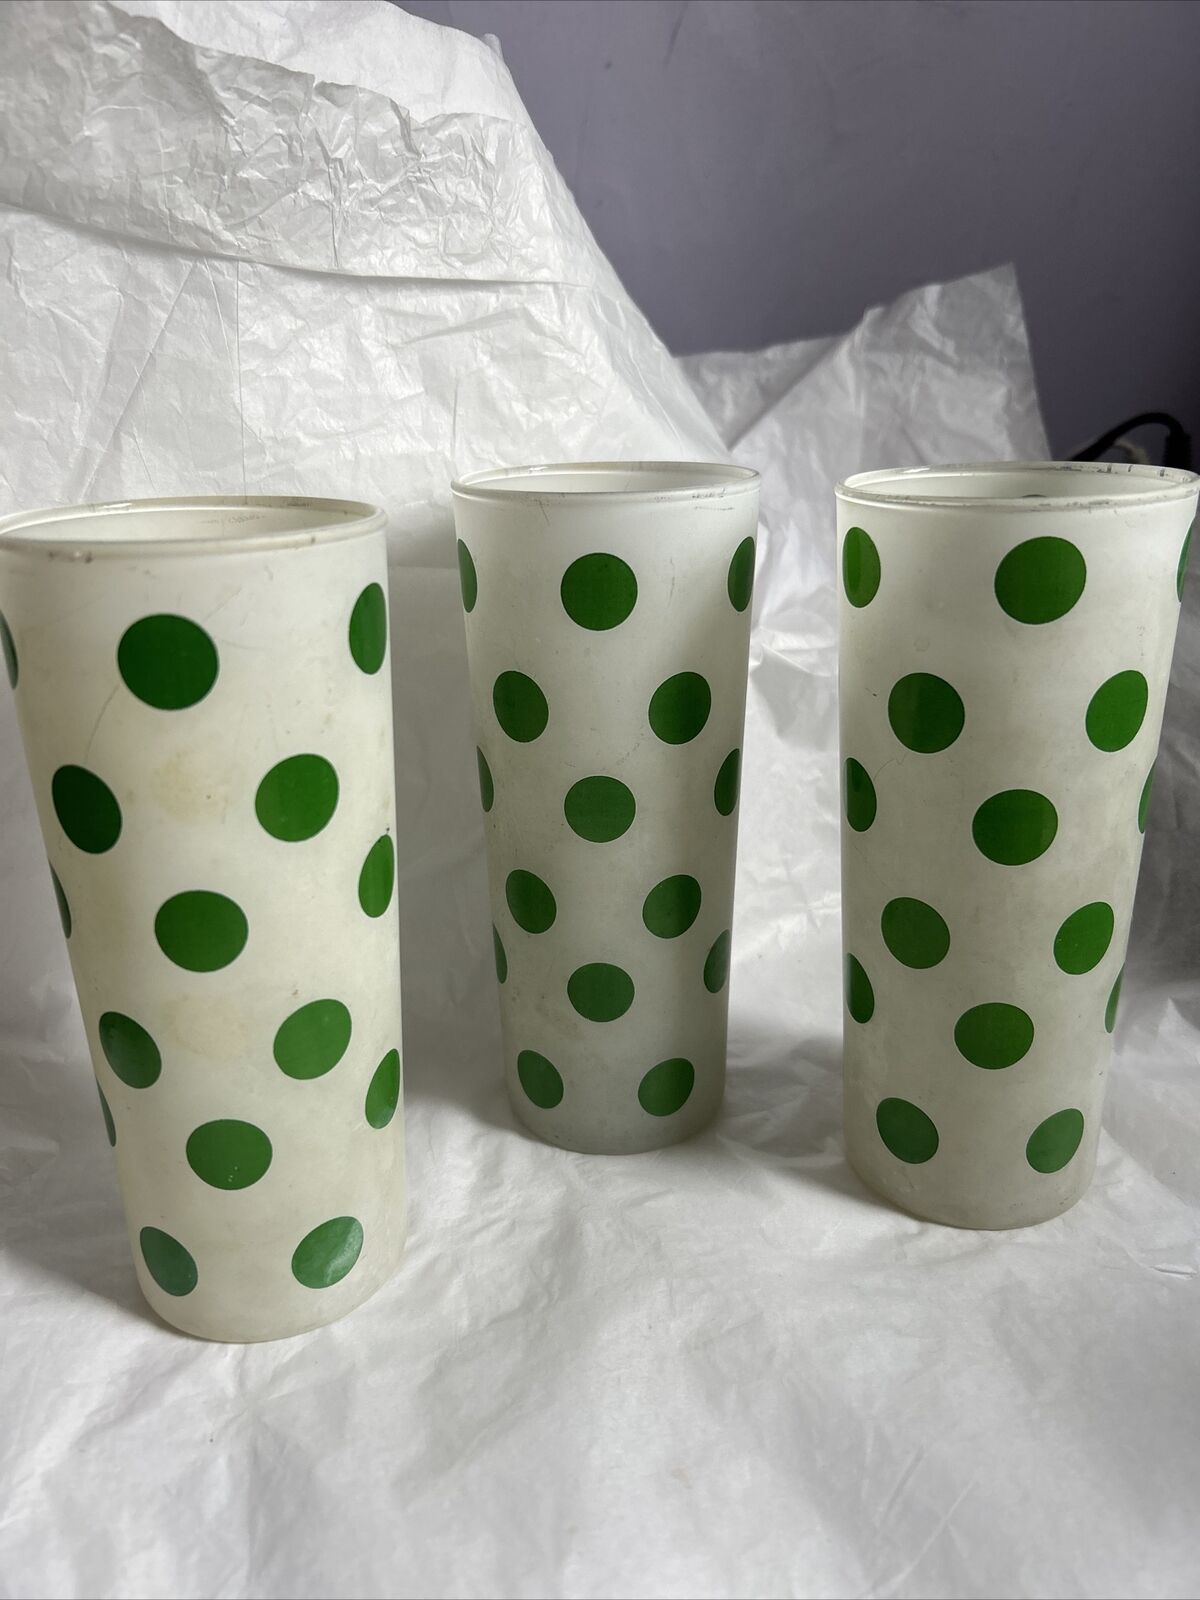 (3)Fire King Anchor Hocking Tall Frosted Green POLKA Dot Glass Tumbler Glasses